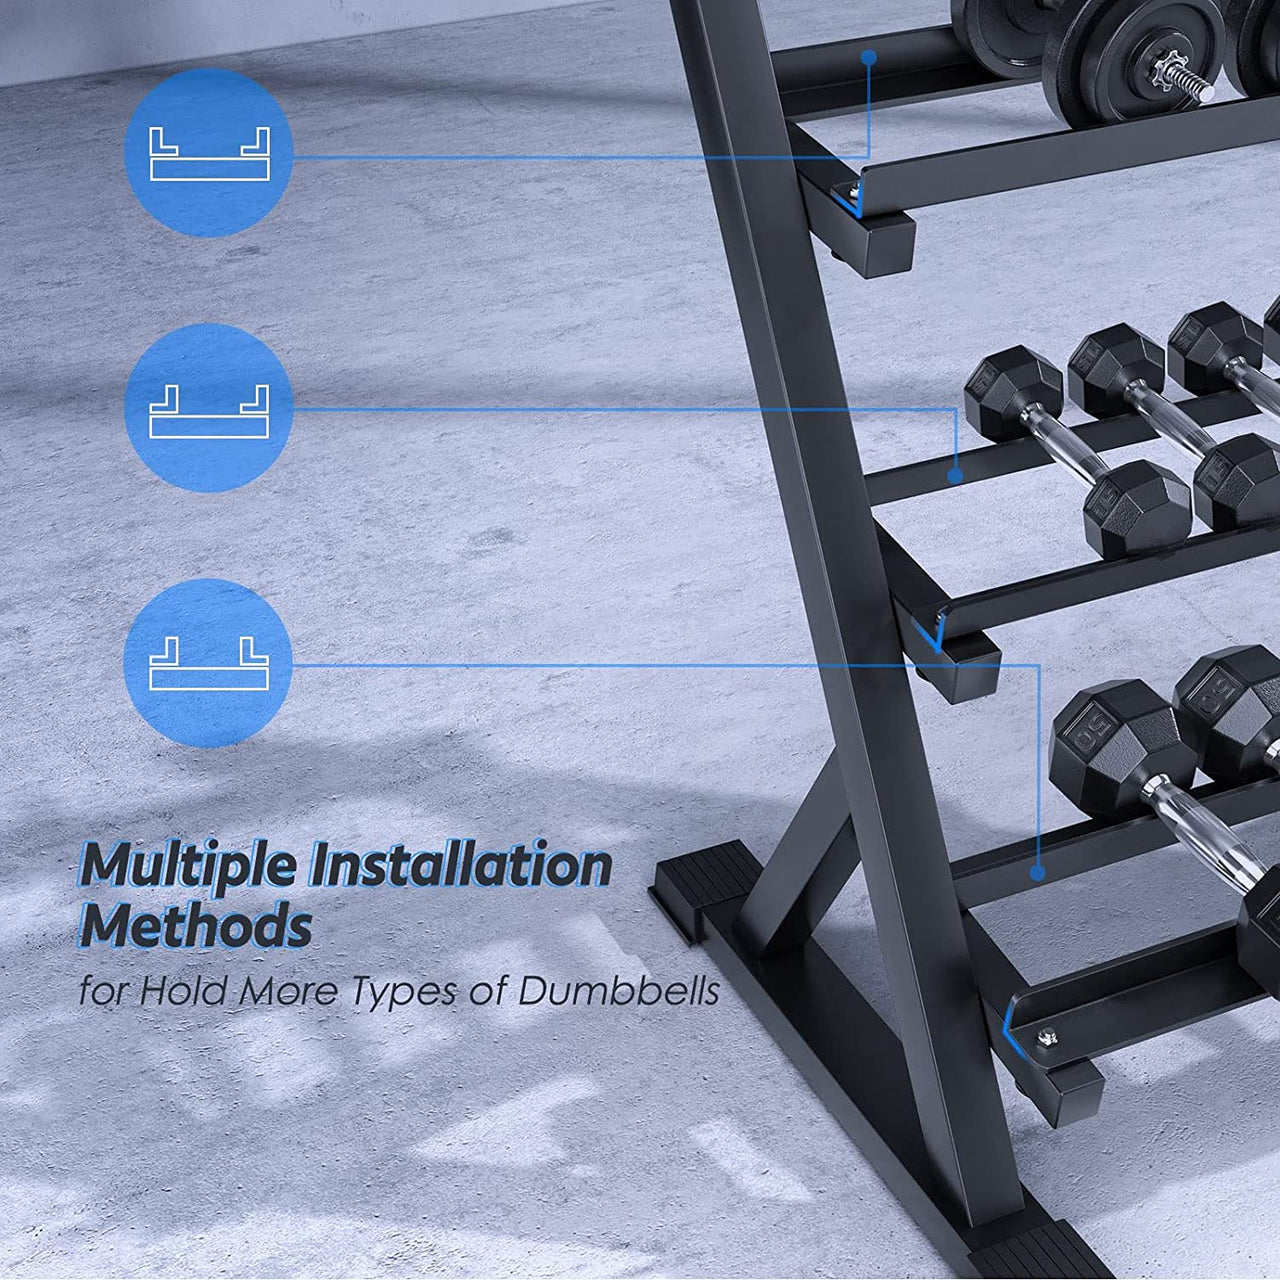 10 Pair Dumbbell Rack-features multiple installation methods to hold more dumbbells